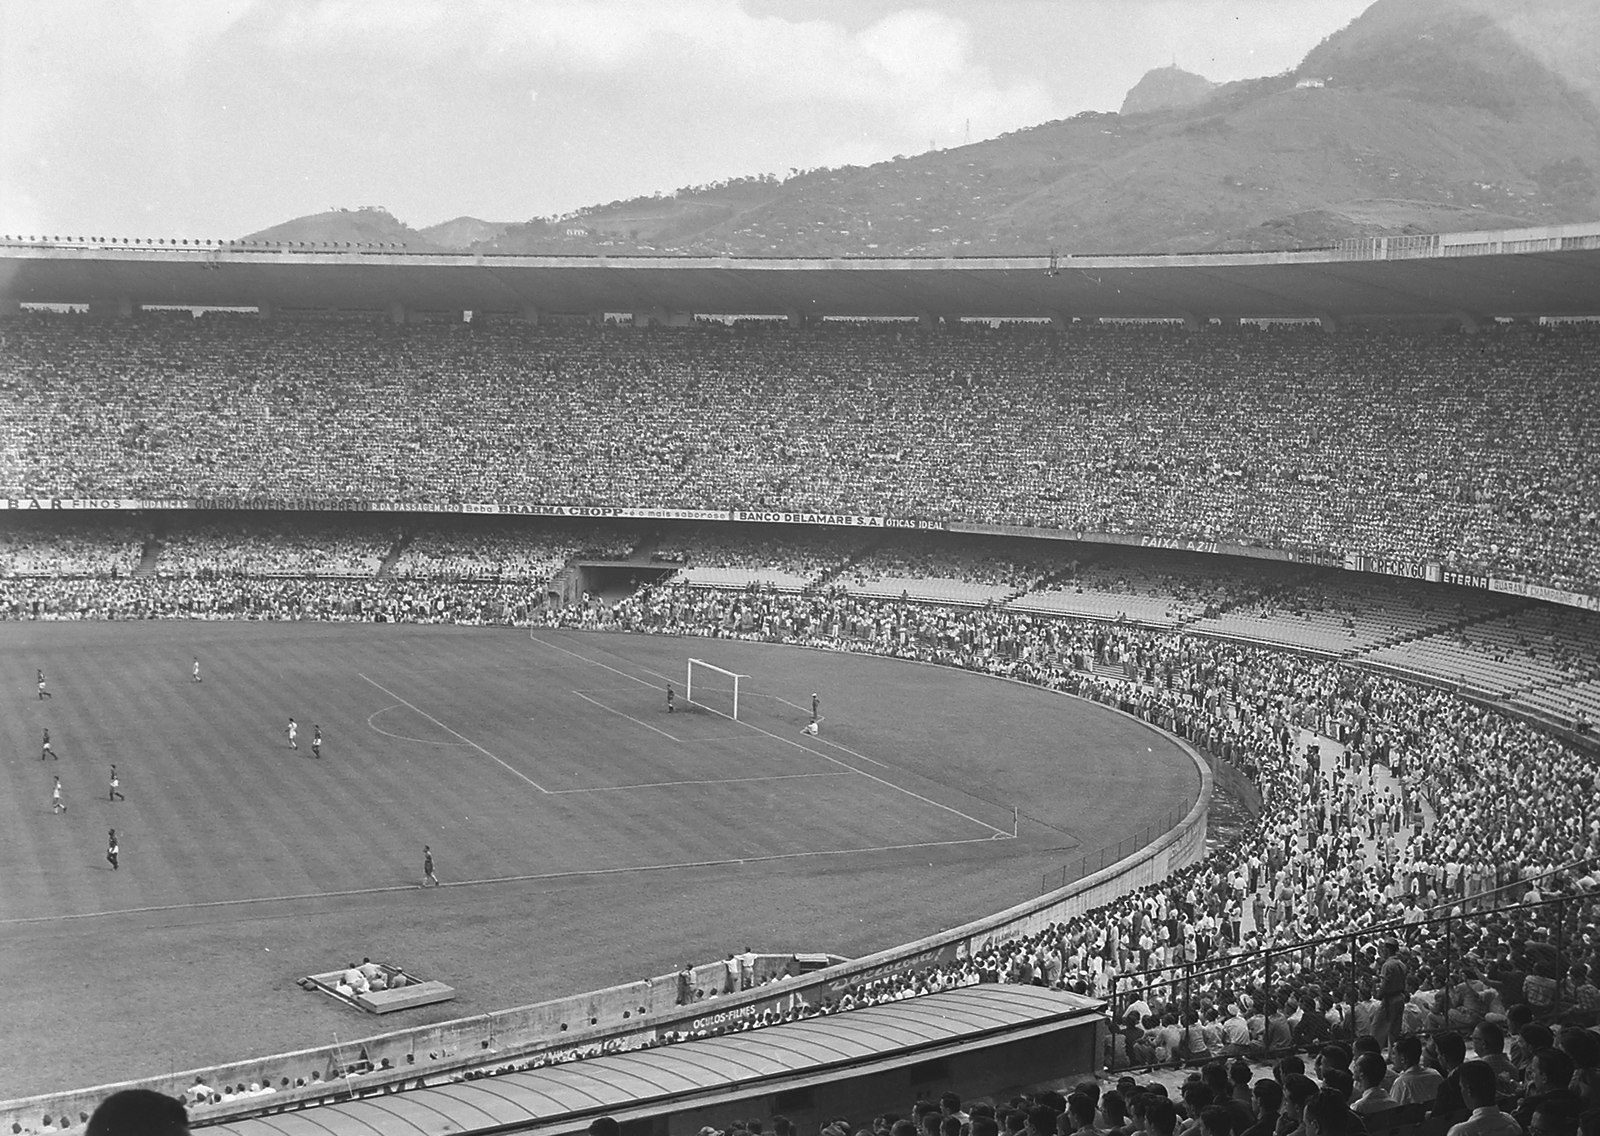 The first game at Maracanã, before the 1950 World Cup.